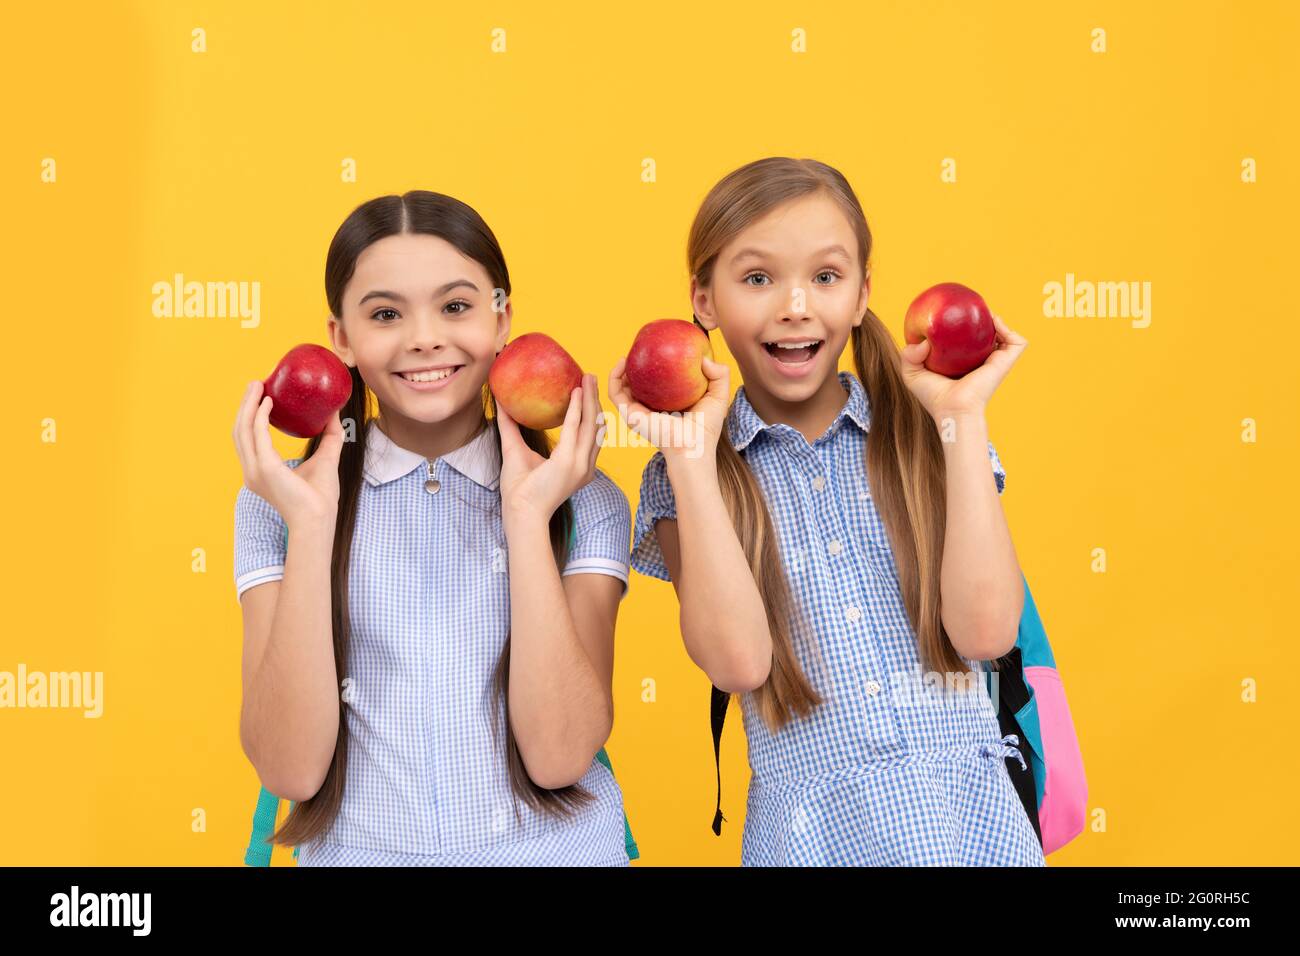 Happy children back to school holding apples for healthy eating, childhood nutrition Stock Photo